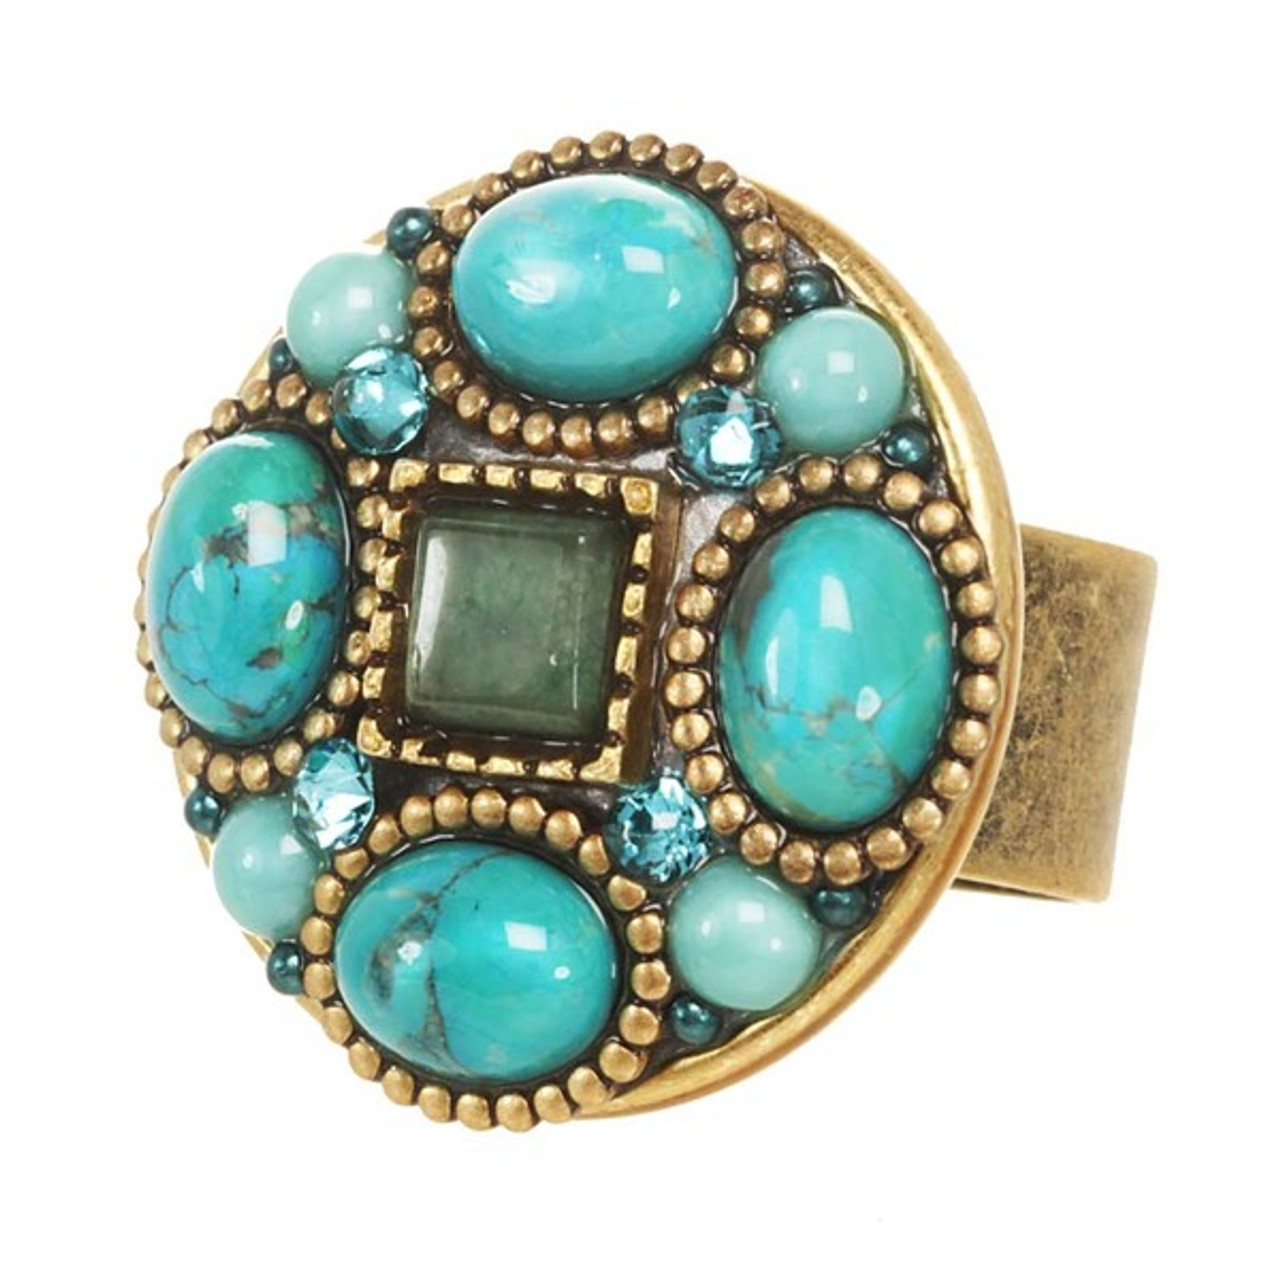 Nile adjustable ring from Michal Golan Jewelry